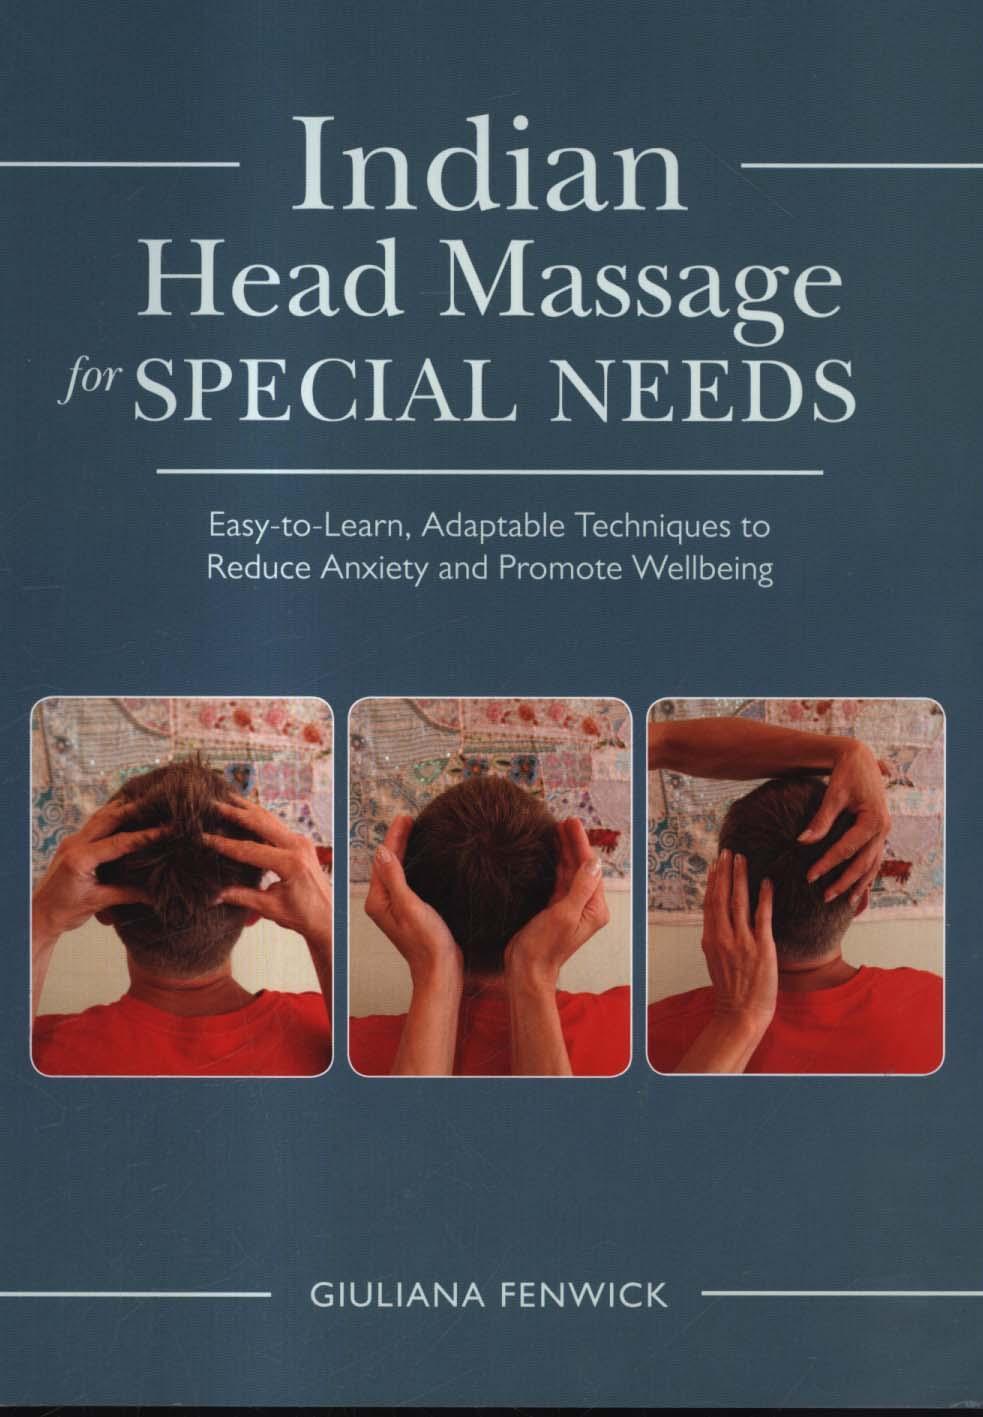 Indian Head Massage for Special Needs